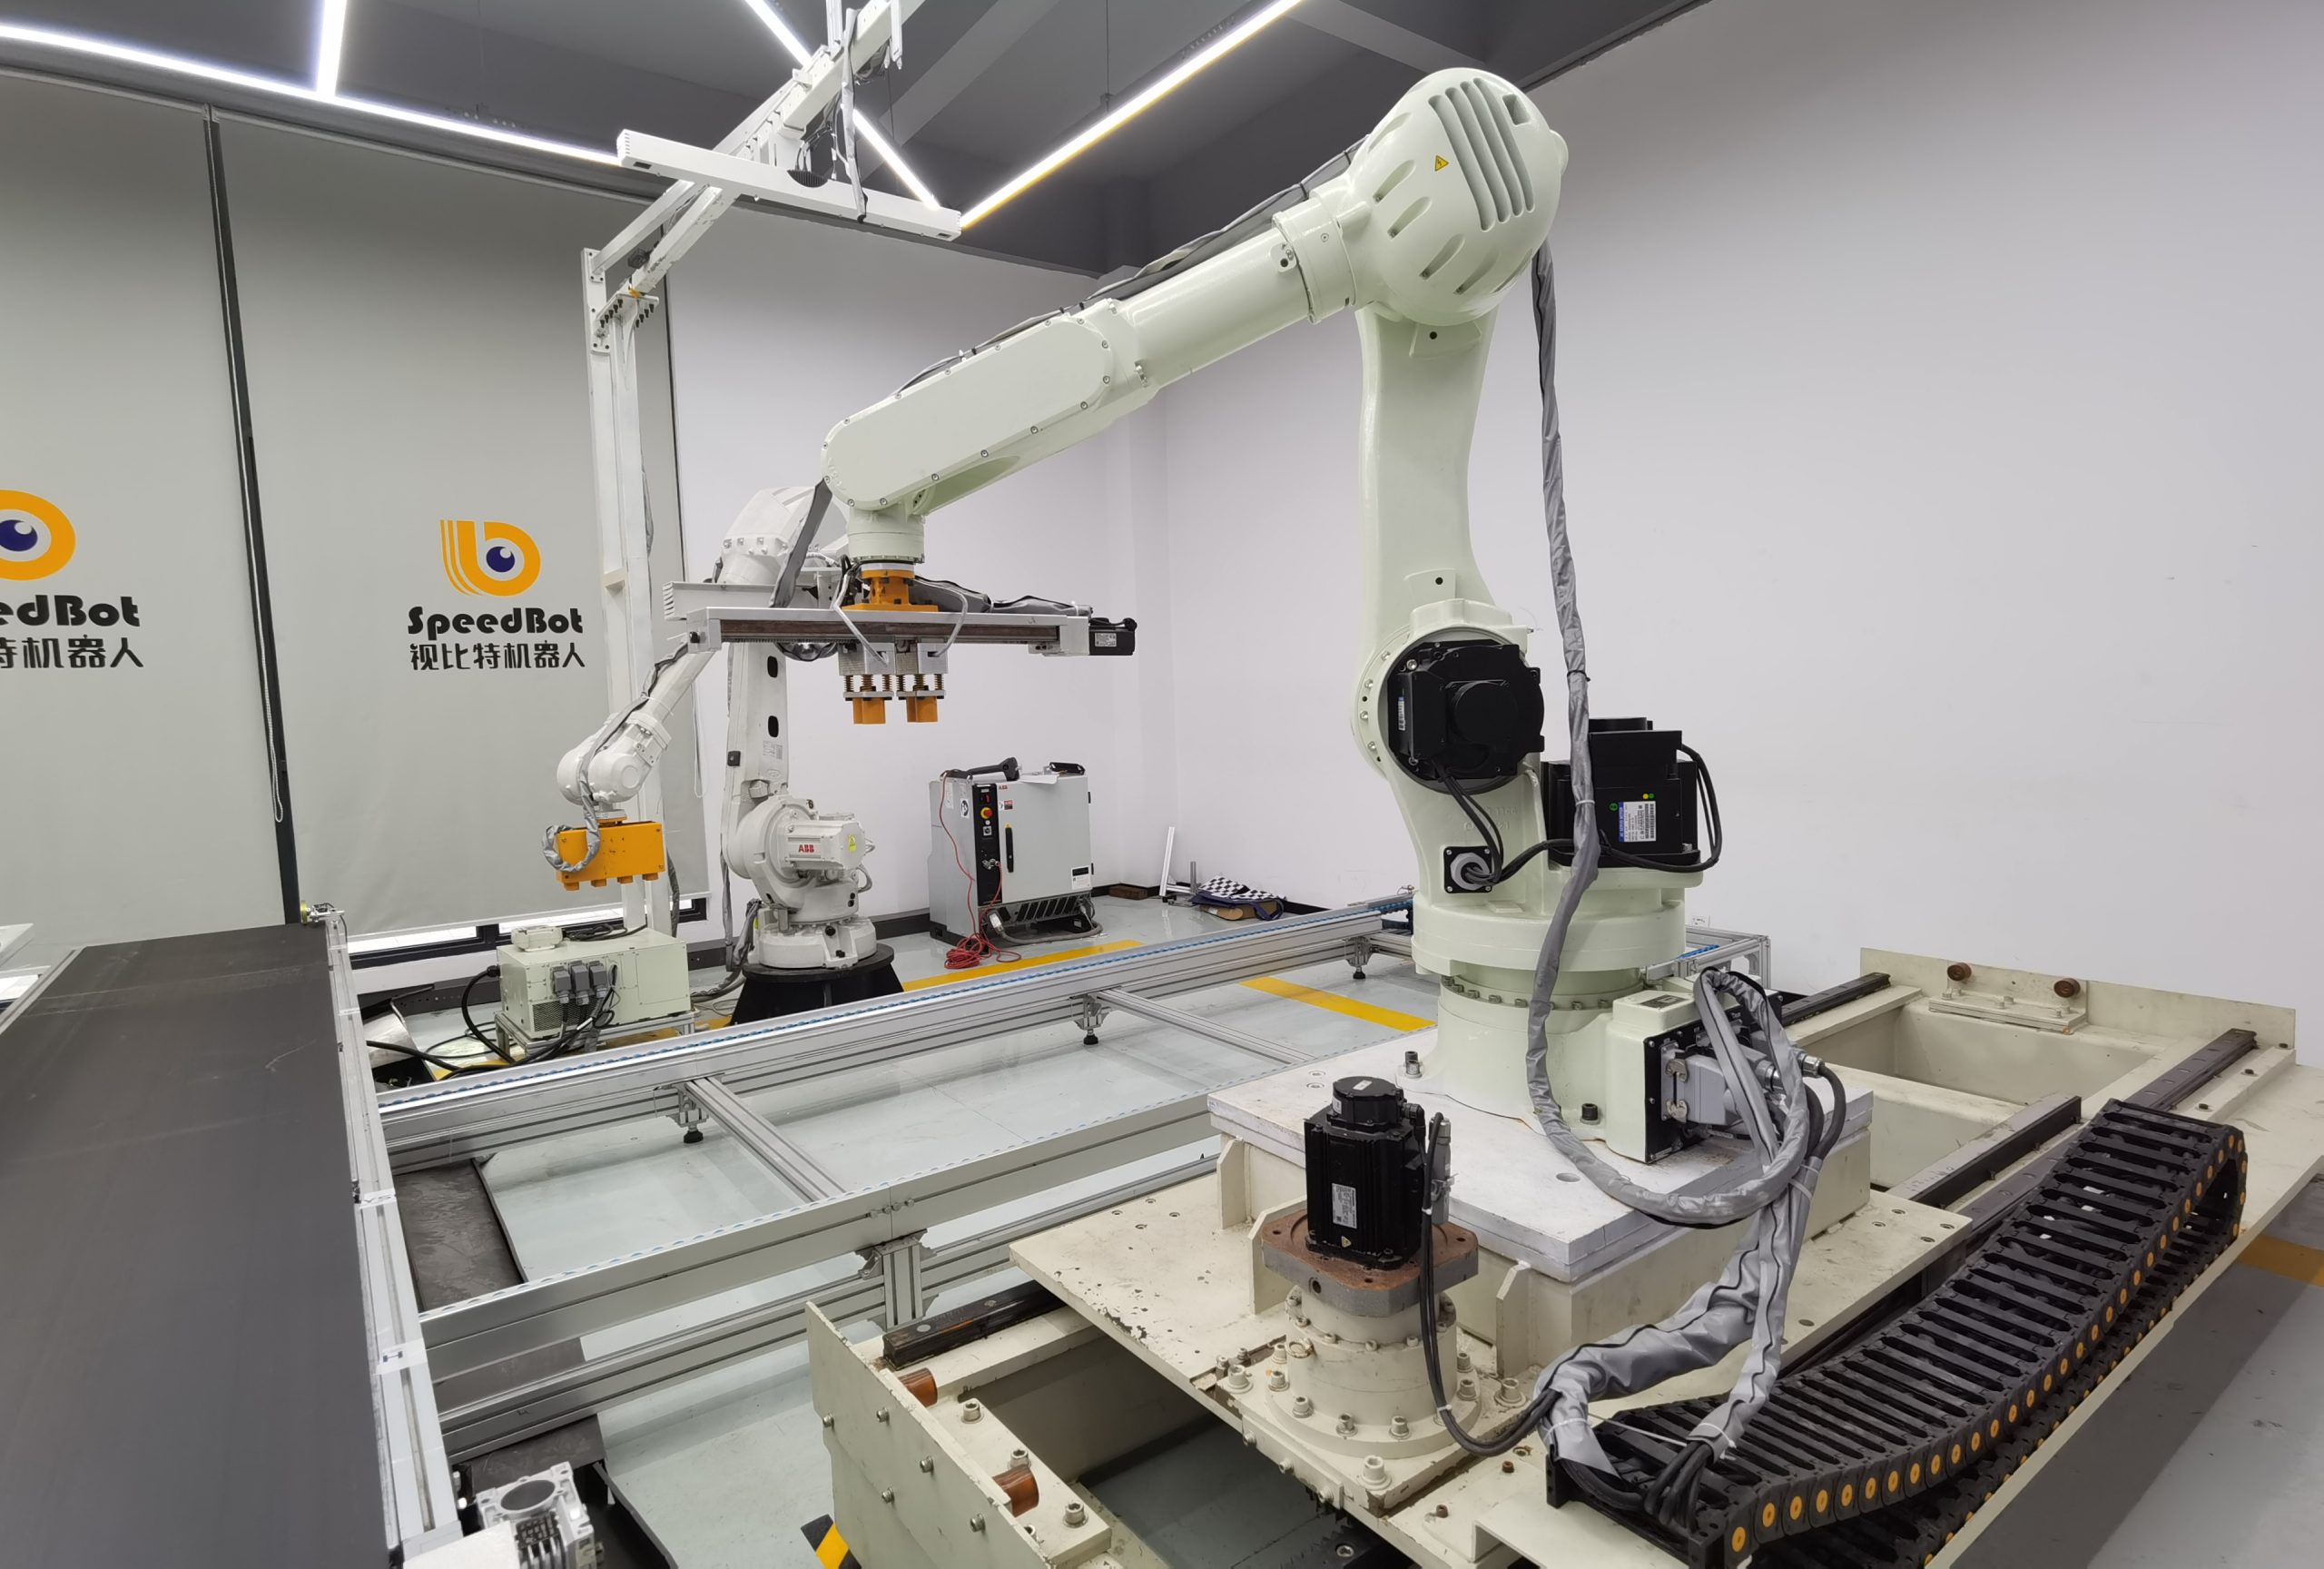 HVR MAG magnetic gripper & Speedbot Robot - magnetic pick and place in sorting line